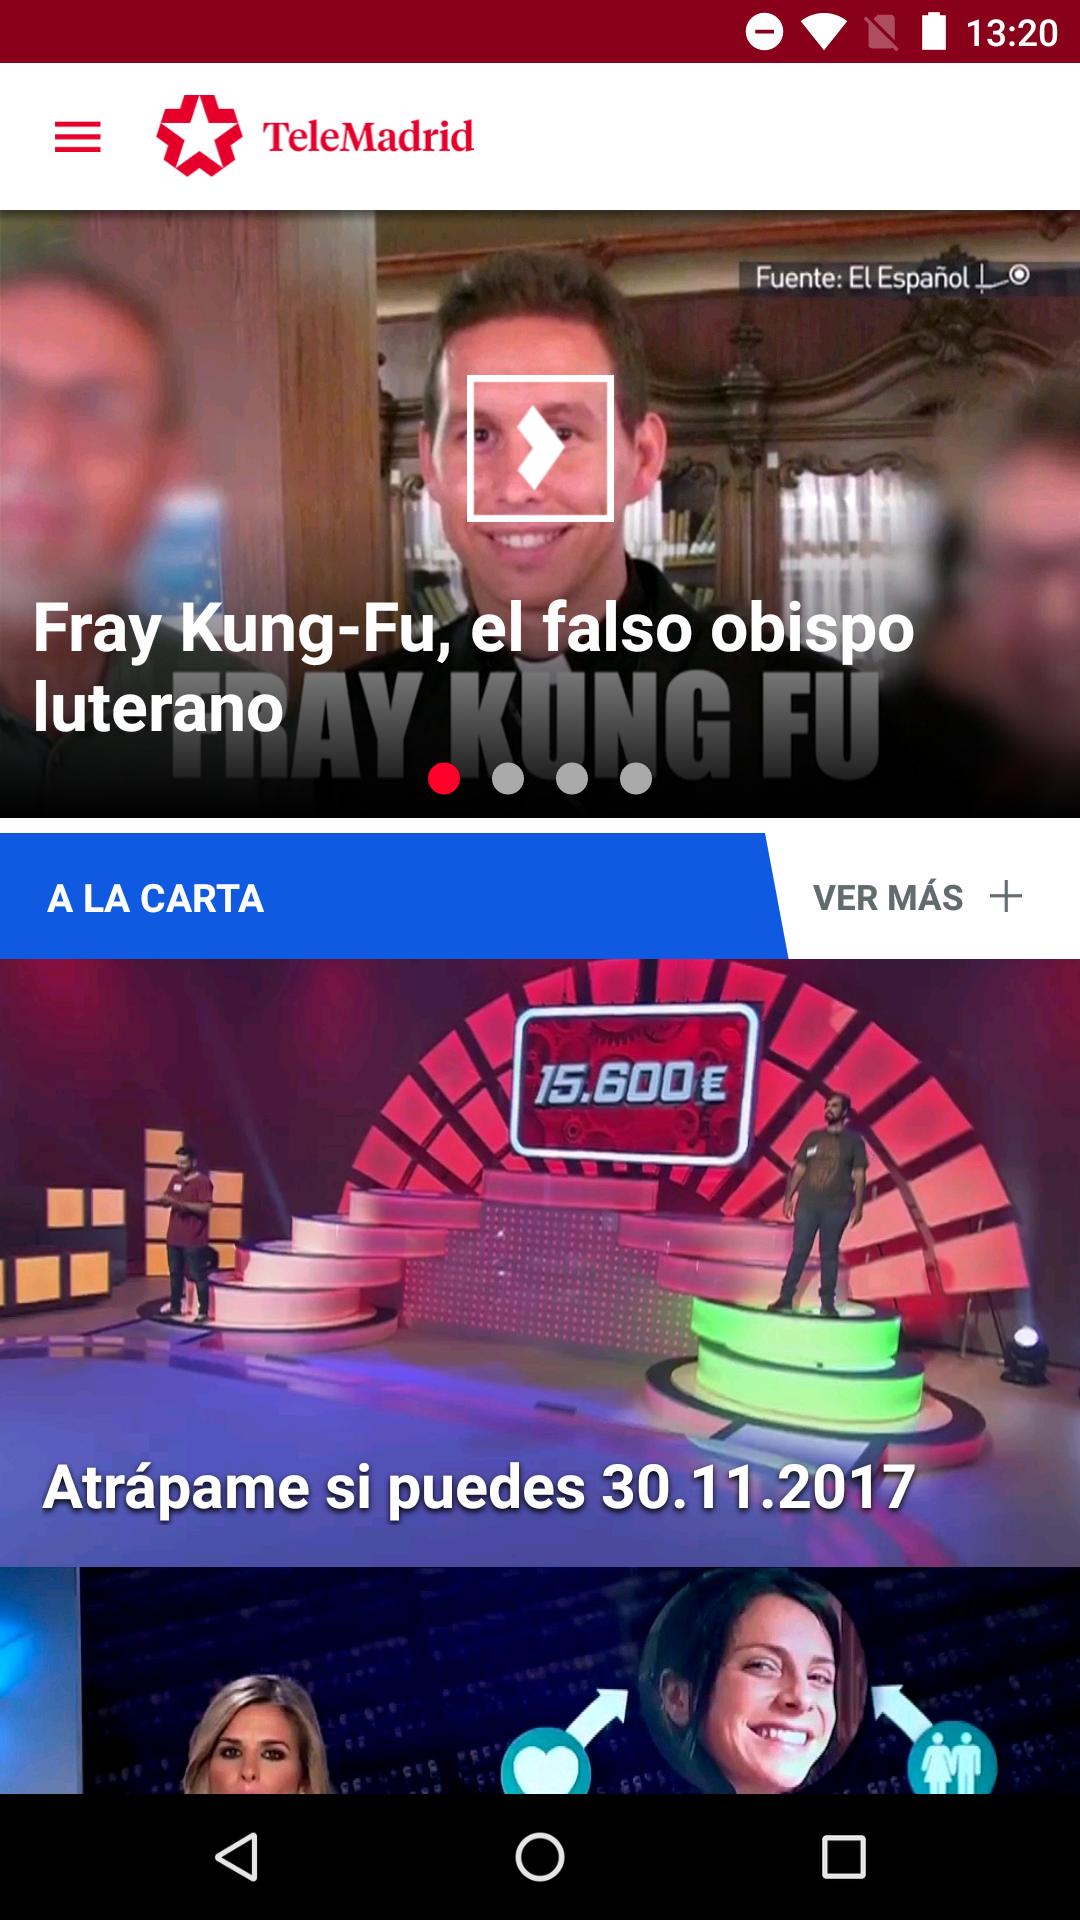 Telemadrid for Android - APK Download